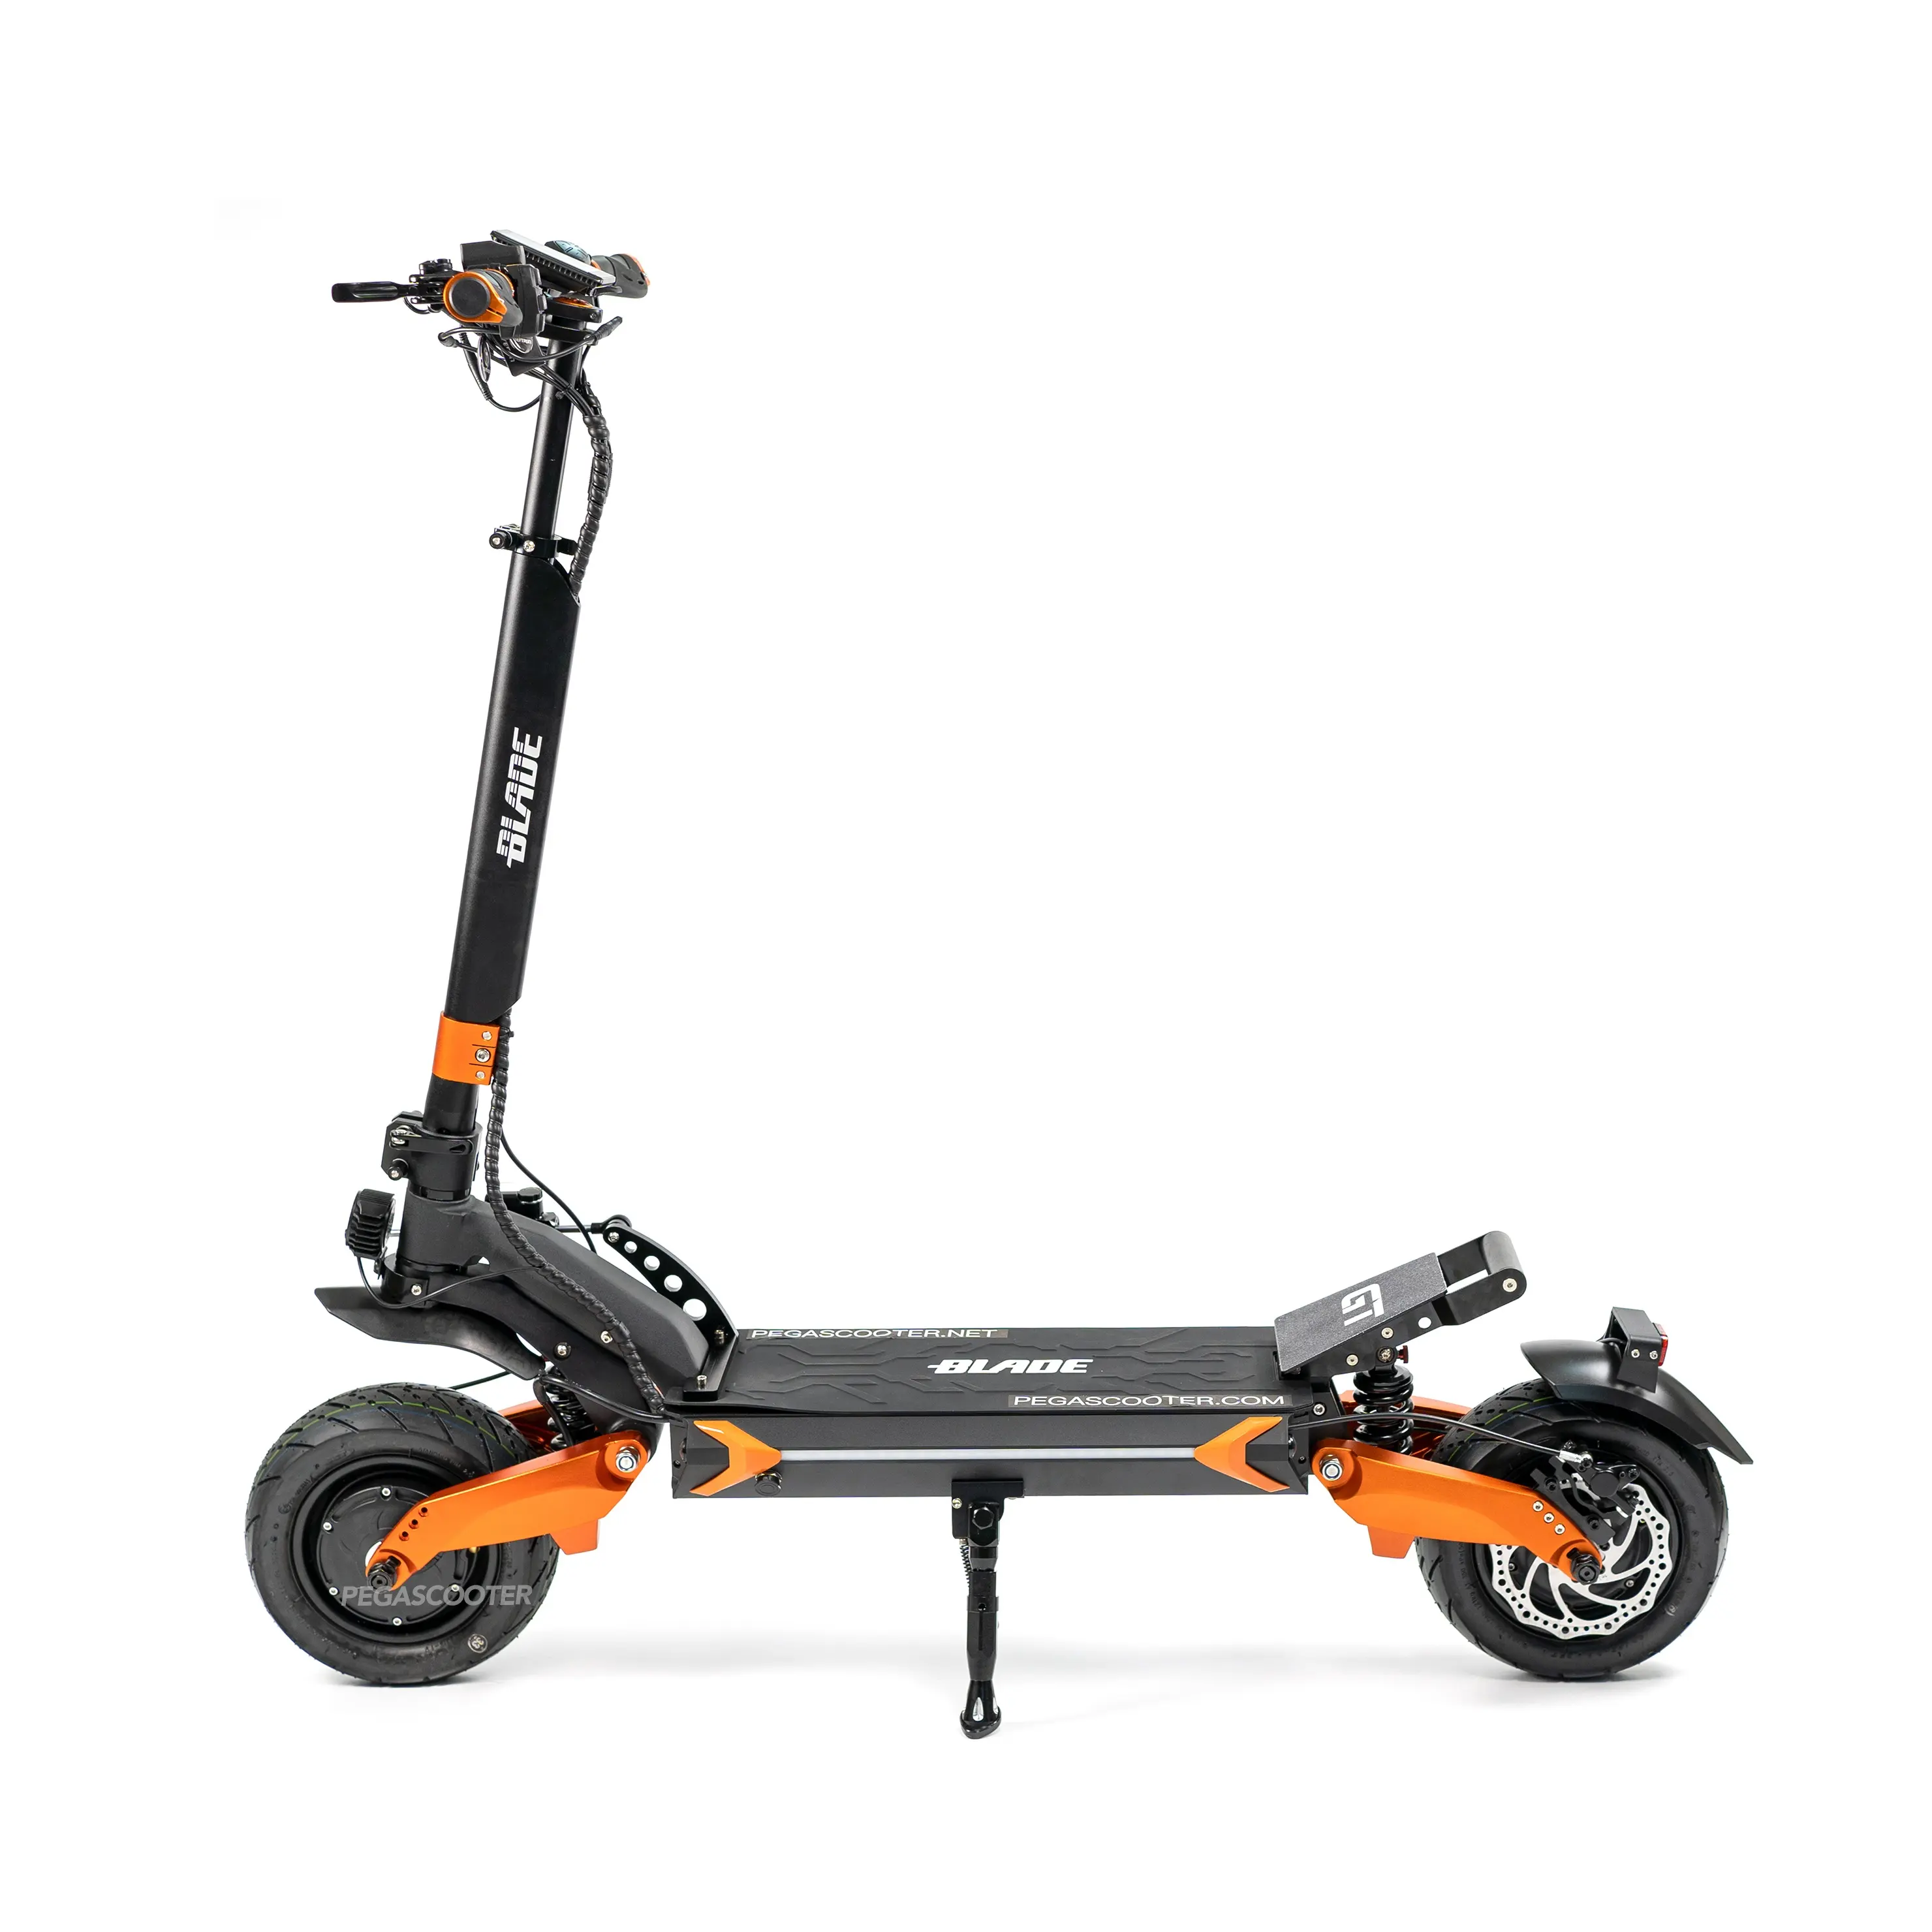 TEVERUN BLADE GT PLUS high speed electric scooter 60v 3000w TFT display 30Ah LG battery with NFC